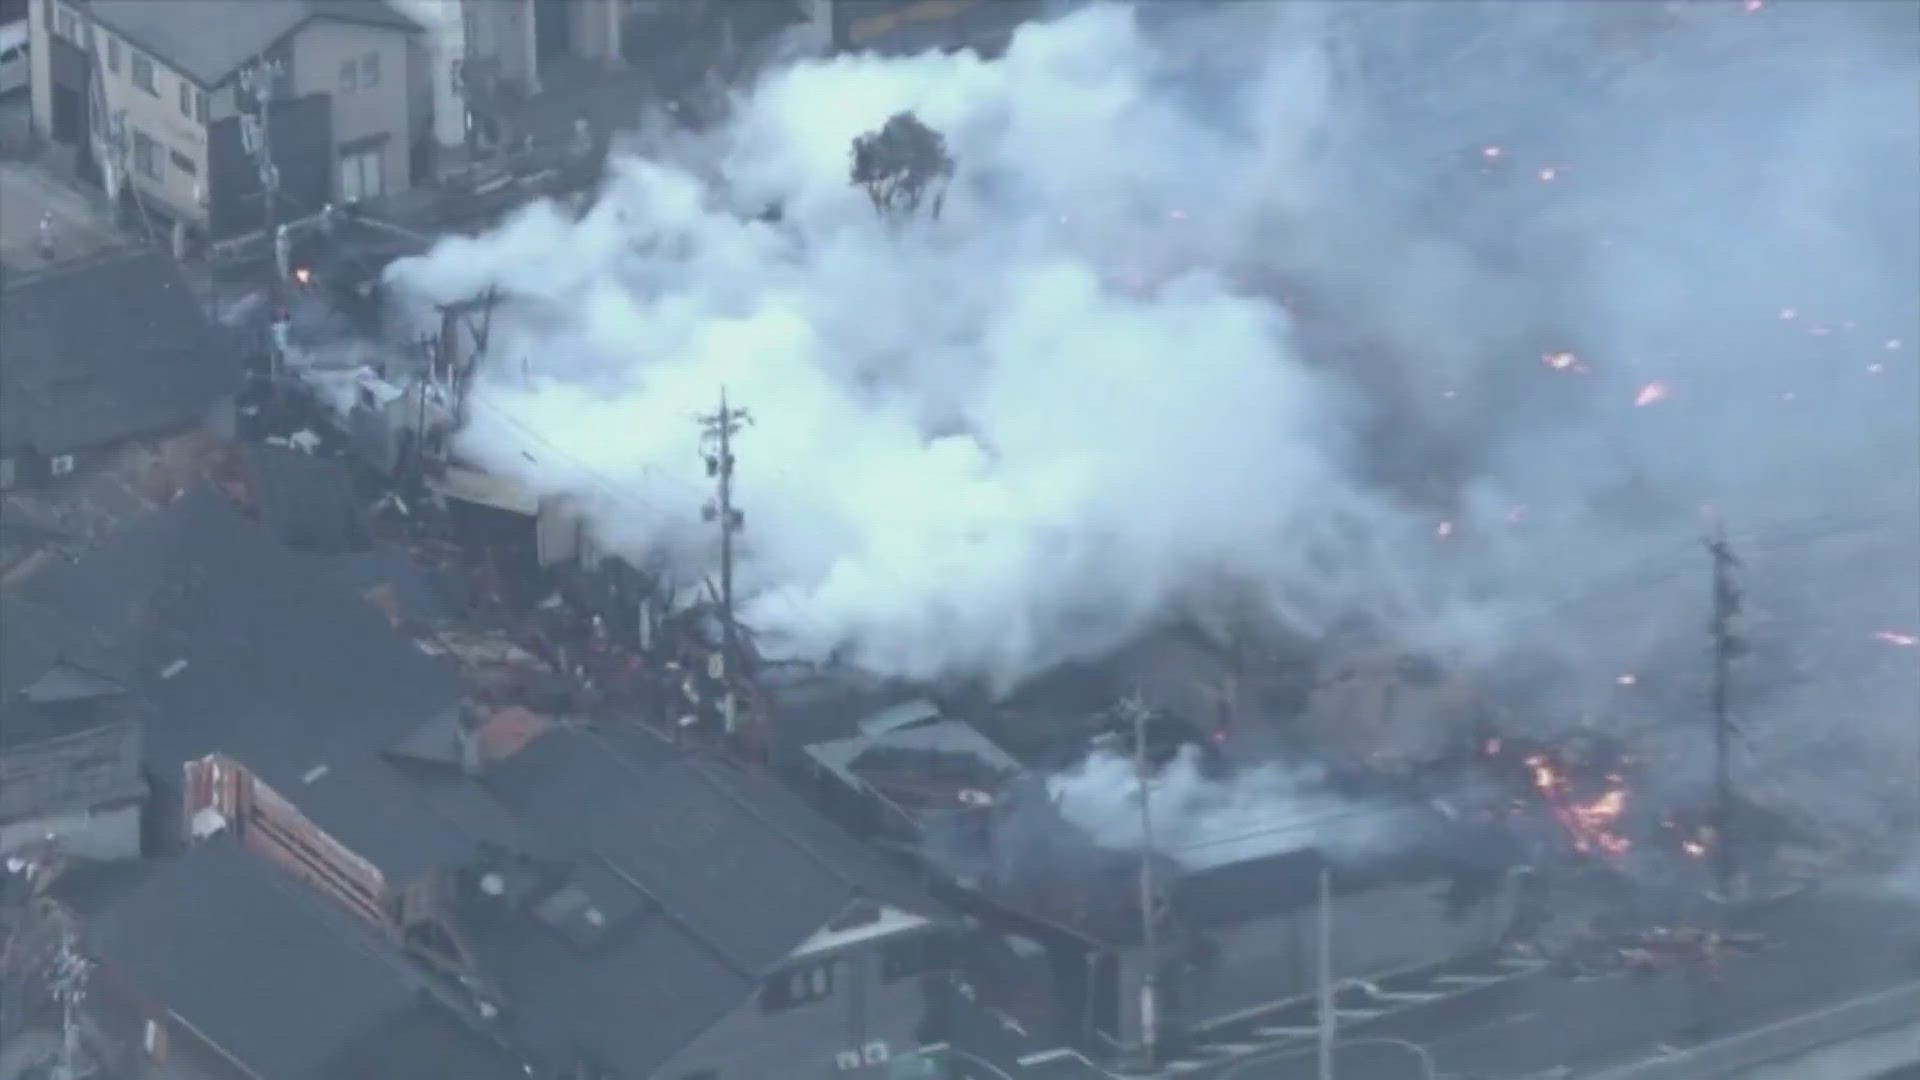 At least 57 people are dead after an earthquake in Japan on New Year's Day.